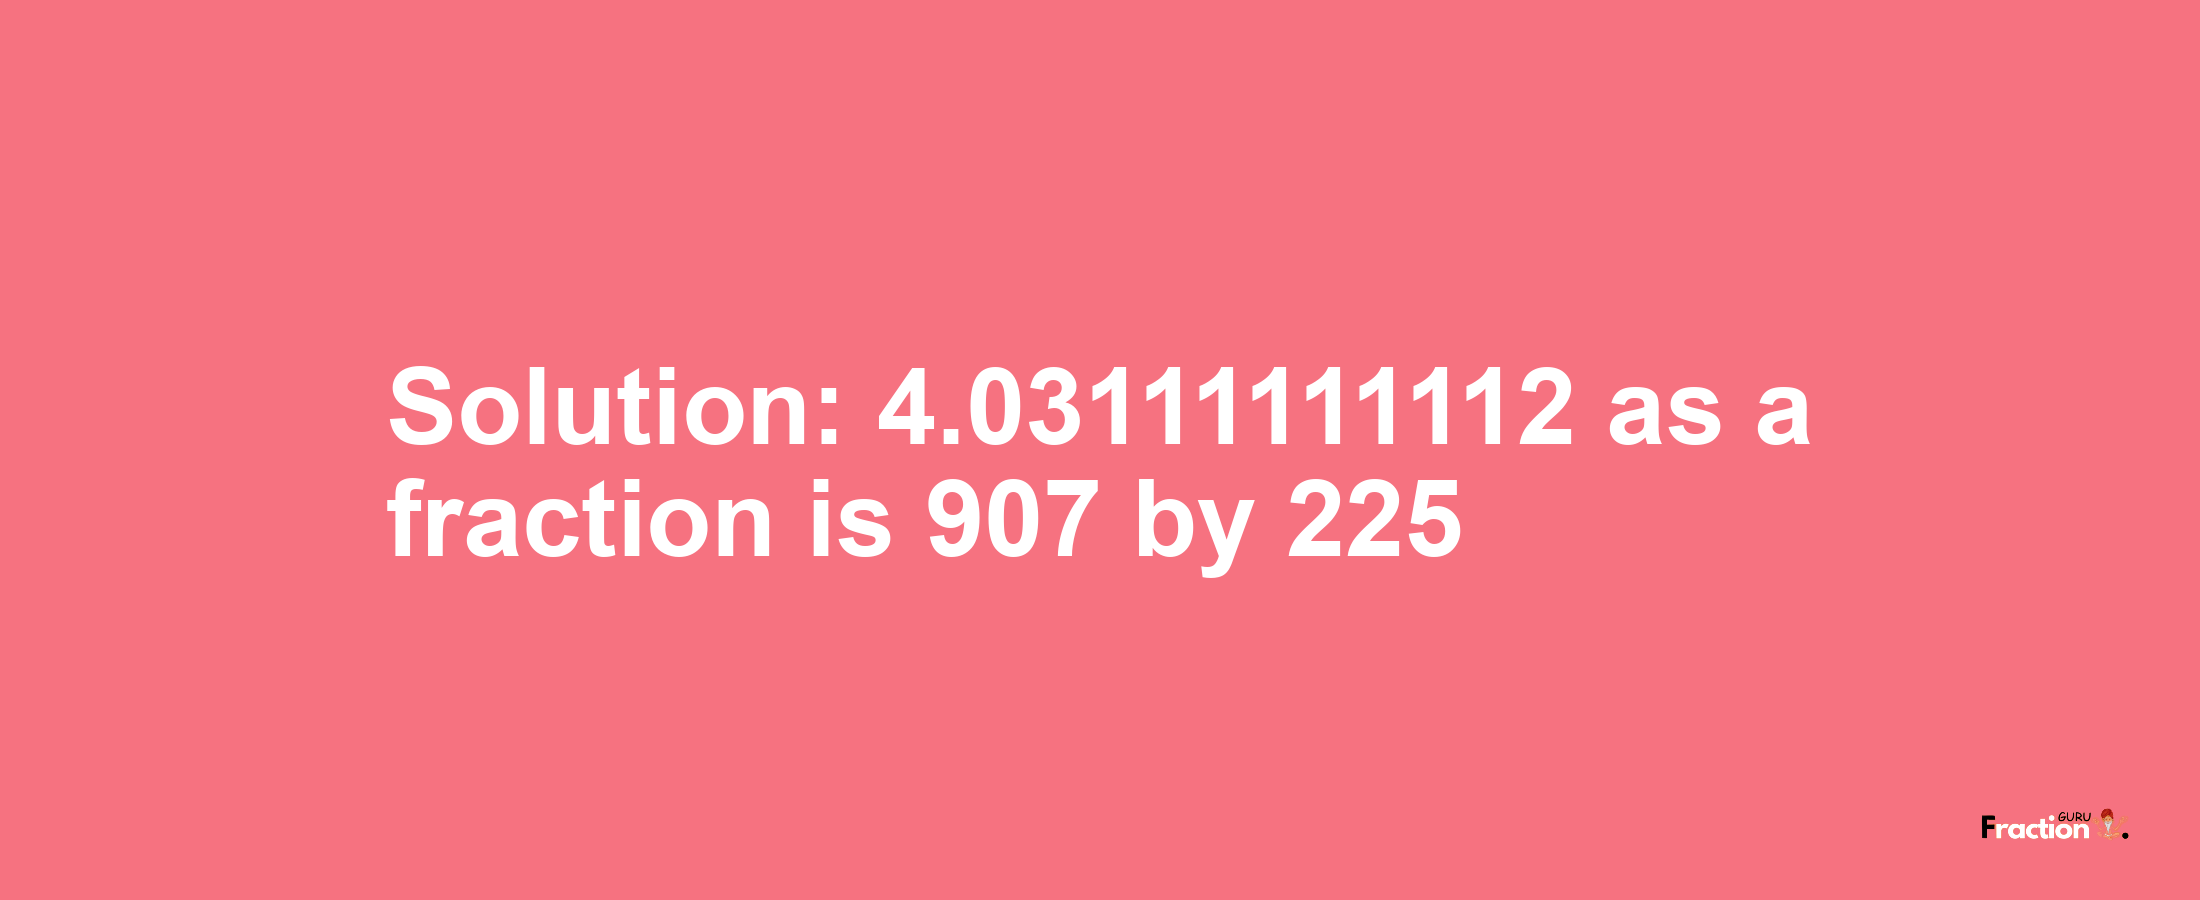 Solution:4.03111111112 as a fraction is 907/225